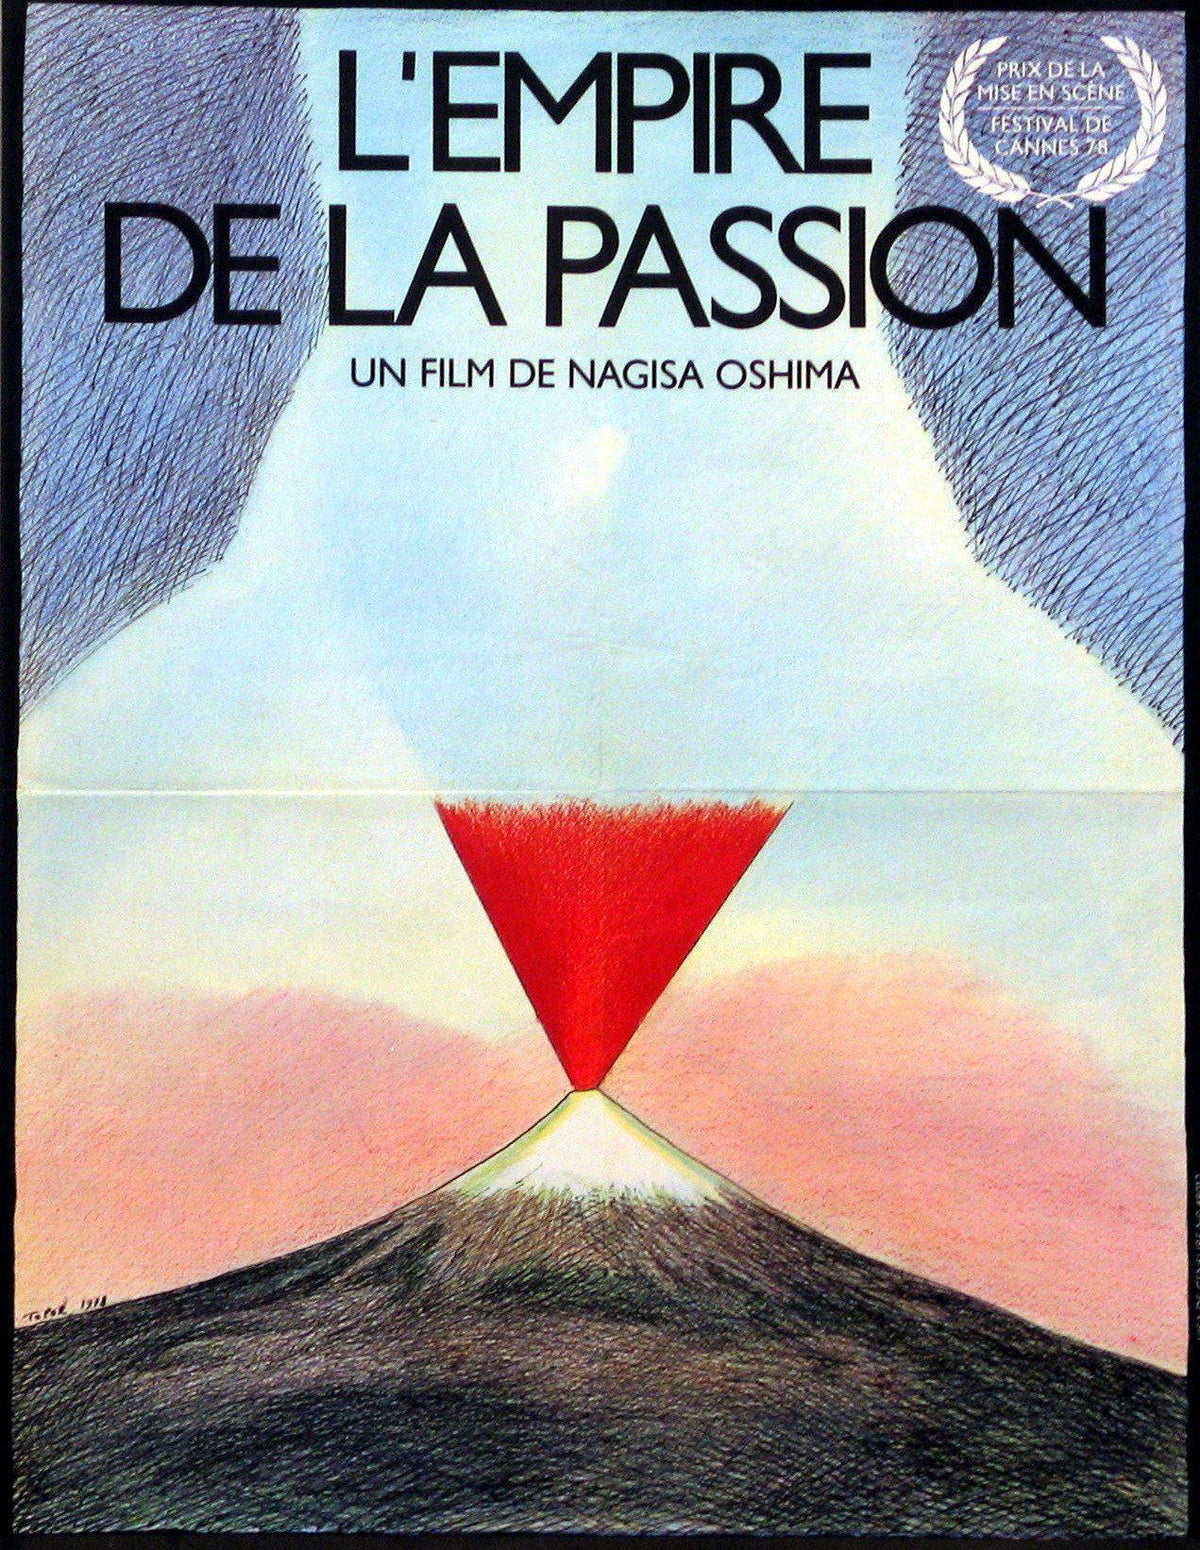 Empire of Passion French small (23x32) Original Vintage Movie Poster